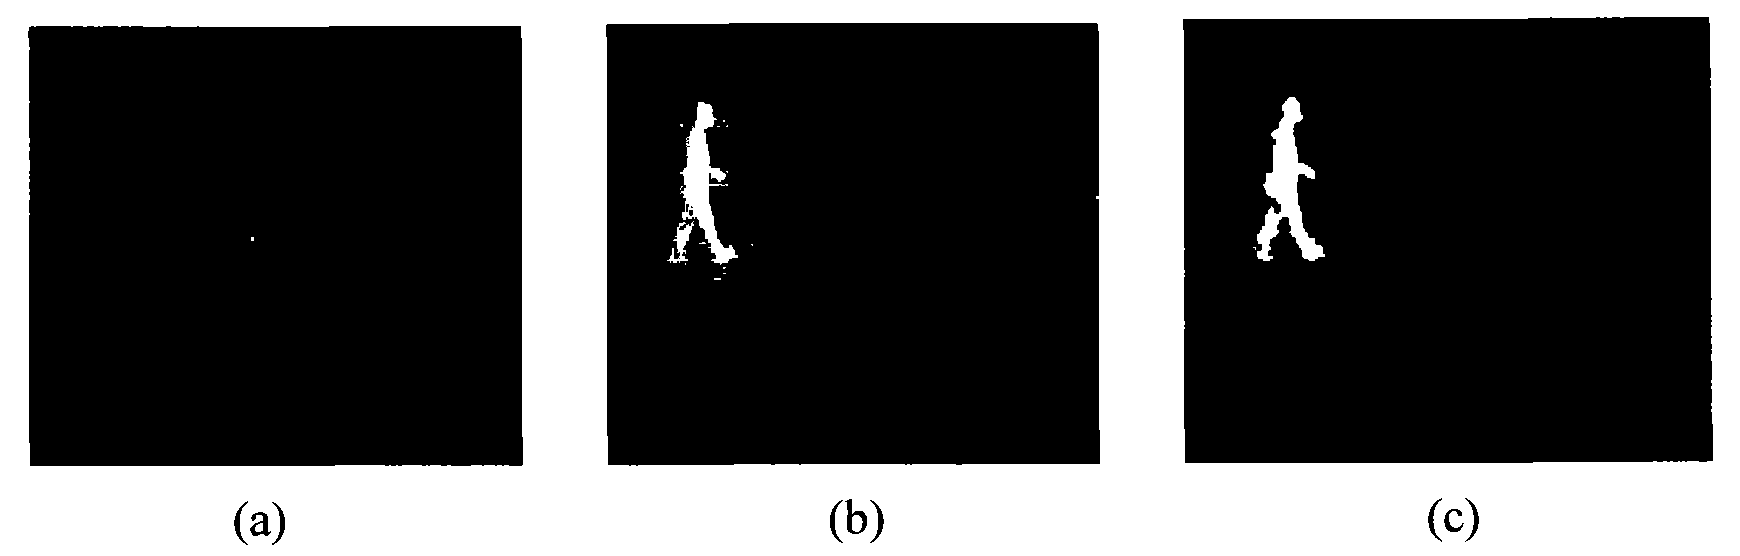 Character recognition method based on human body contour outline